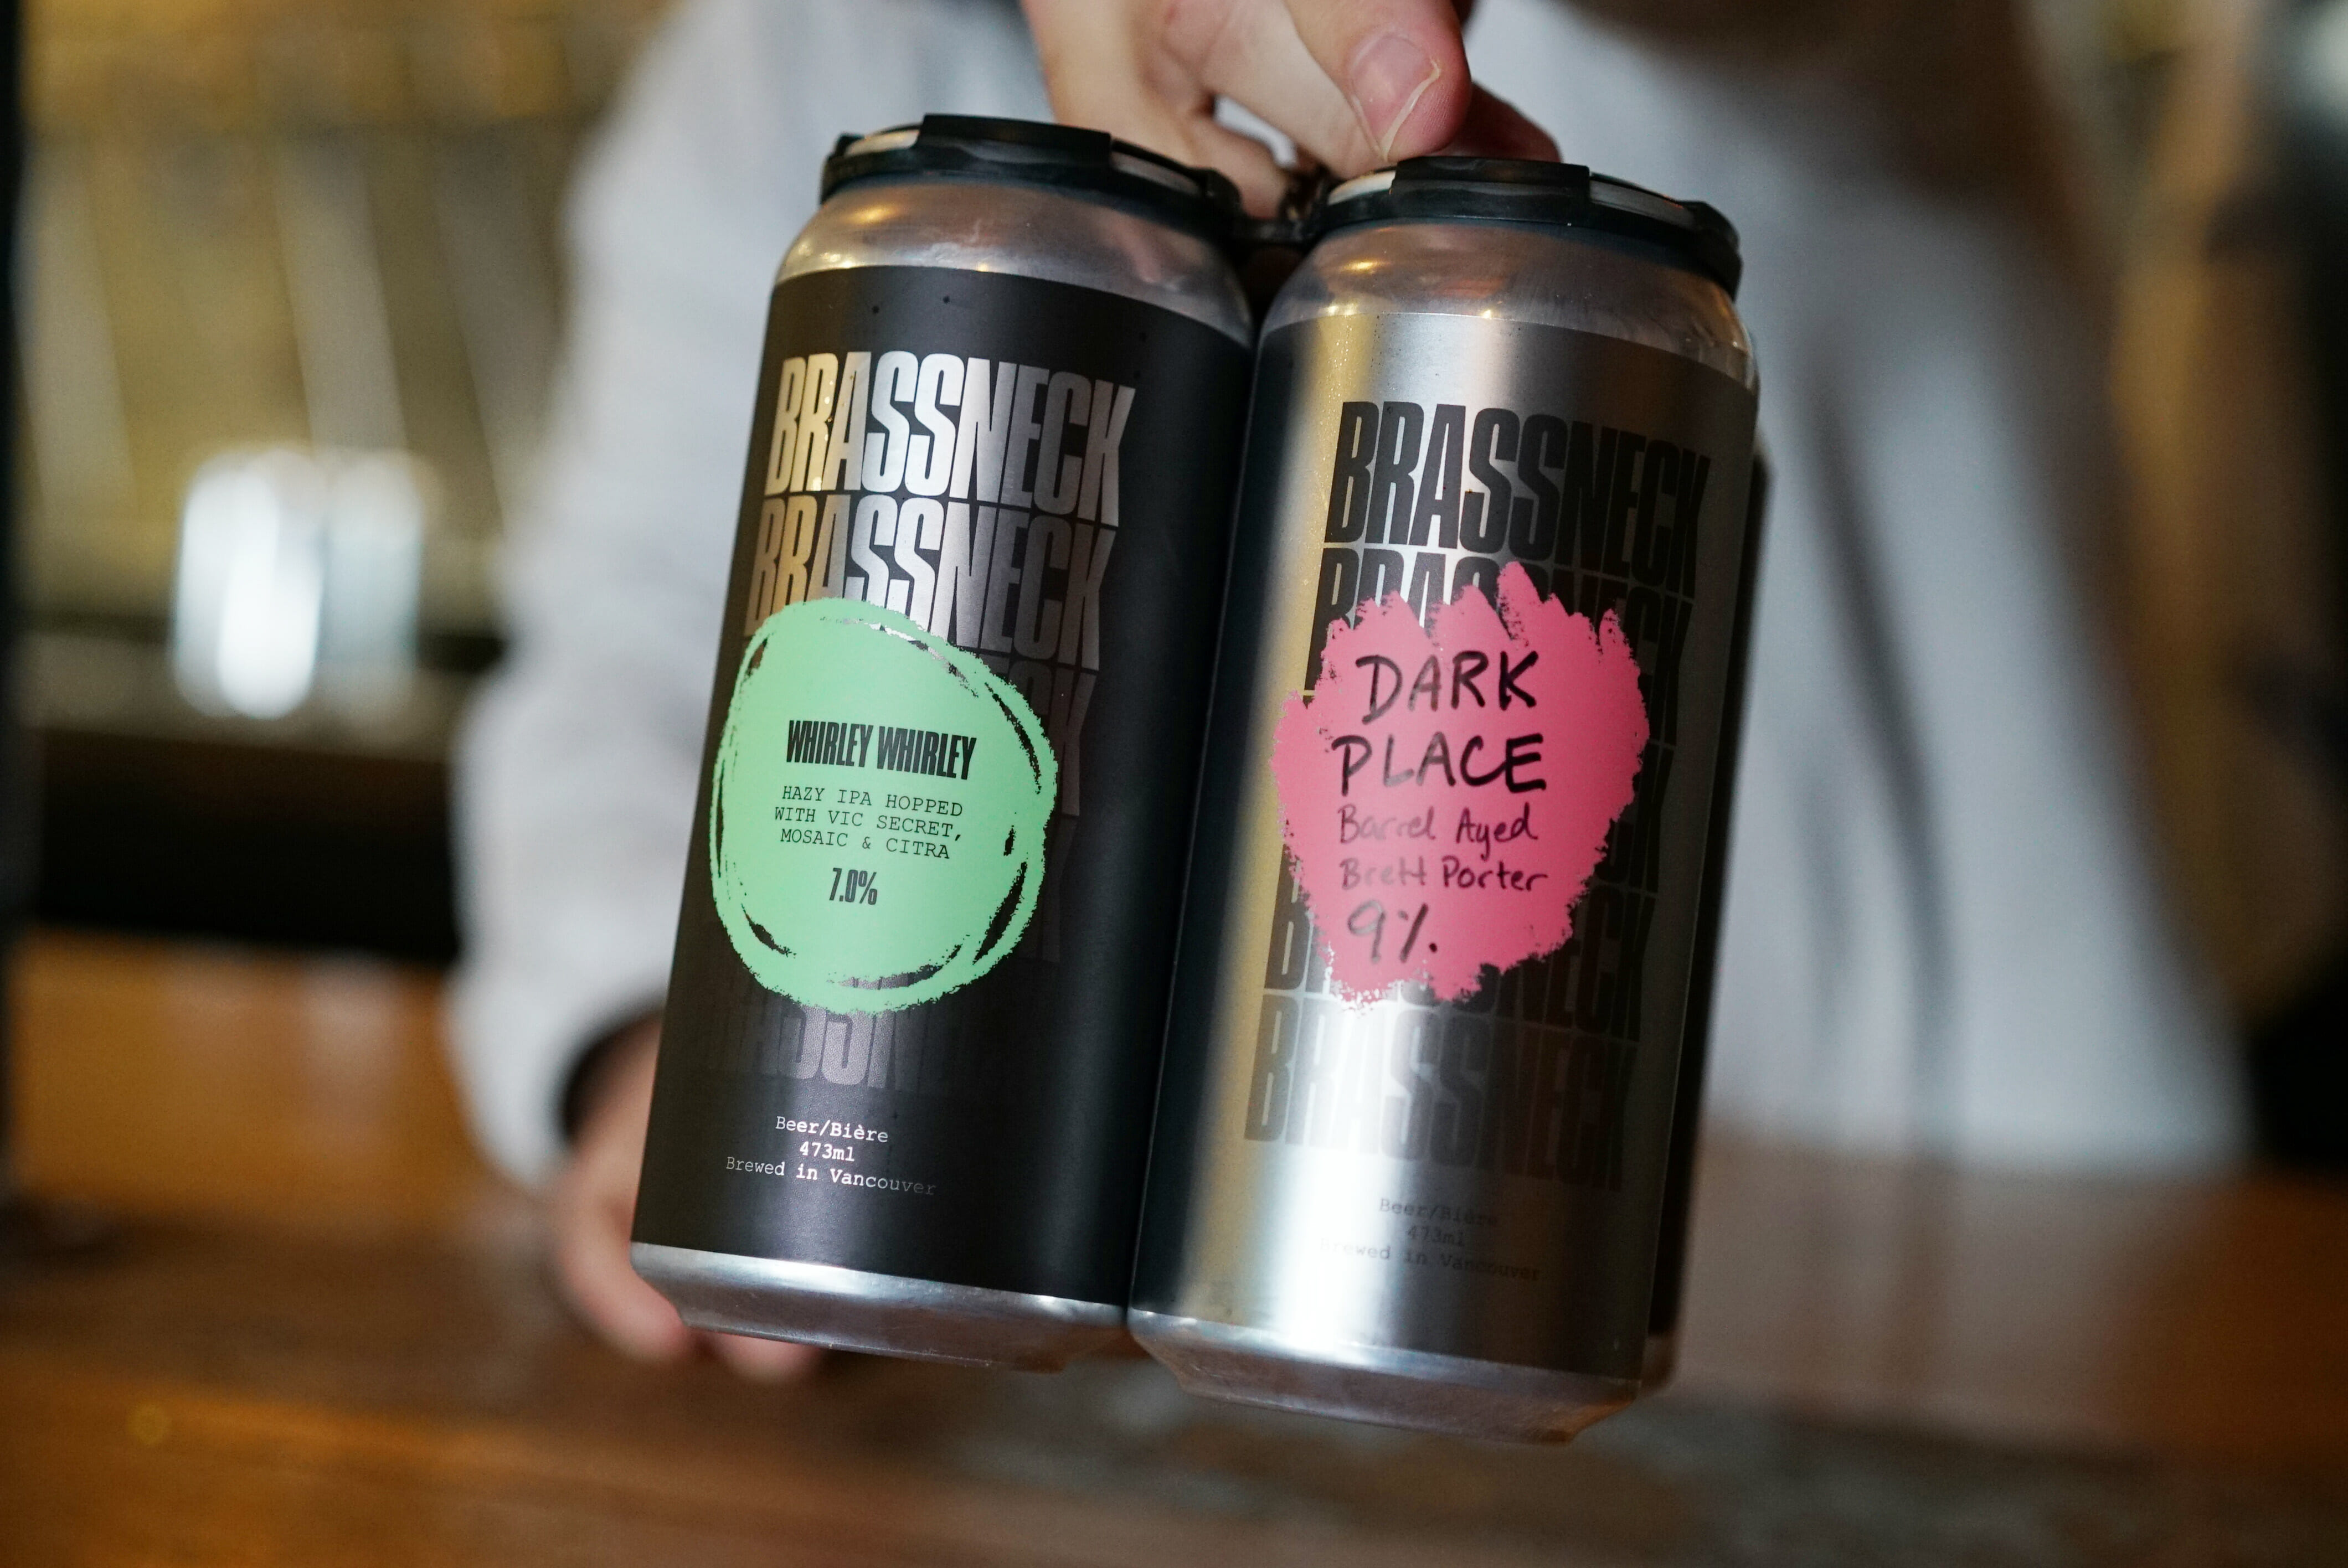 cans of craft beer to go at Brassneck Brewery in Vancouver